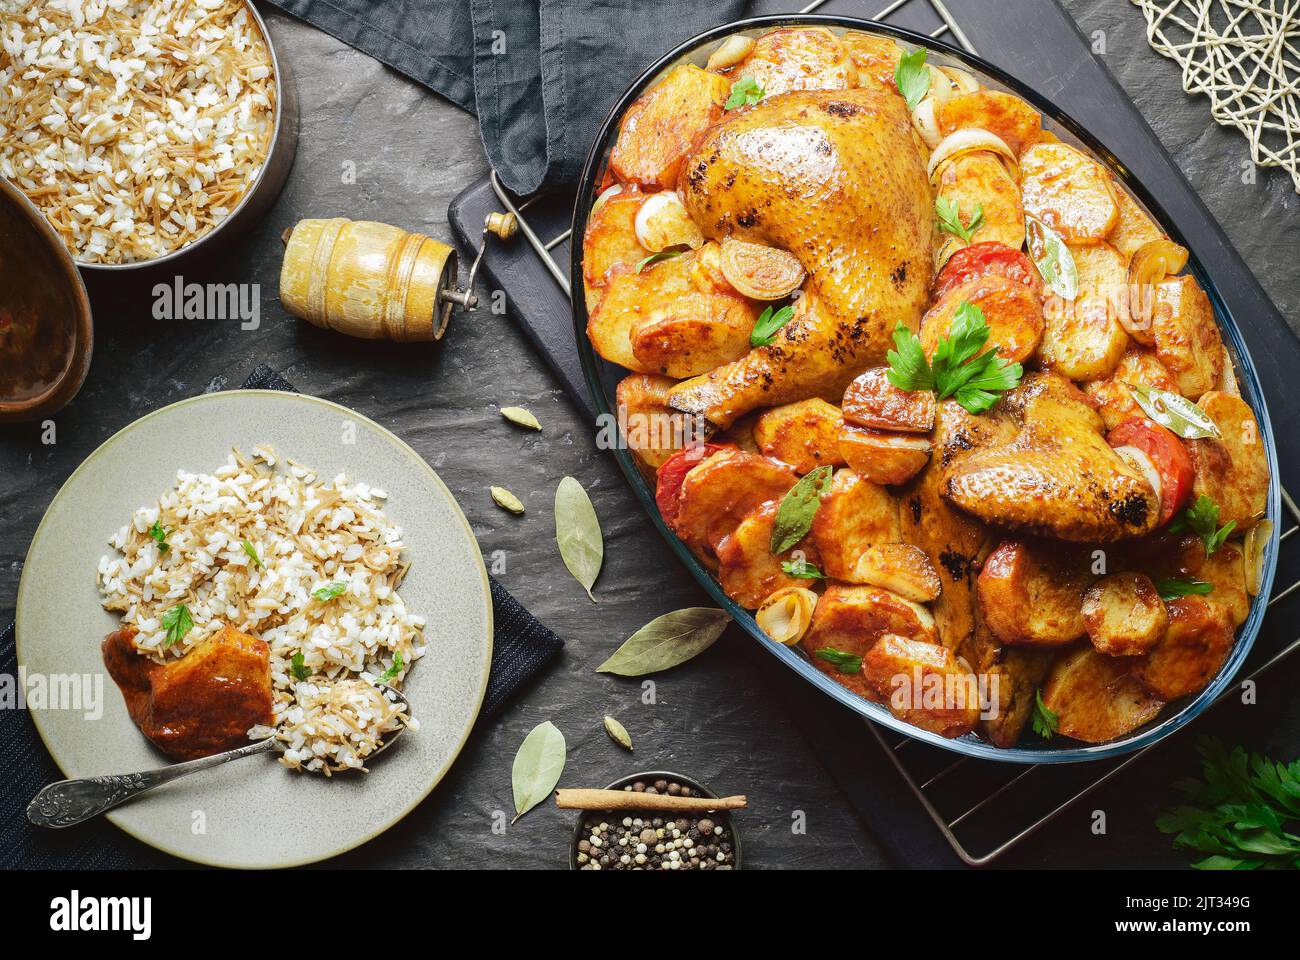 Arabic cuisine; Egyptian traditional dish 'Baked potatoes with roasted chicken' served with oriental rice with vermicelli. Top view with copy space. Stock Photo